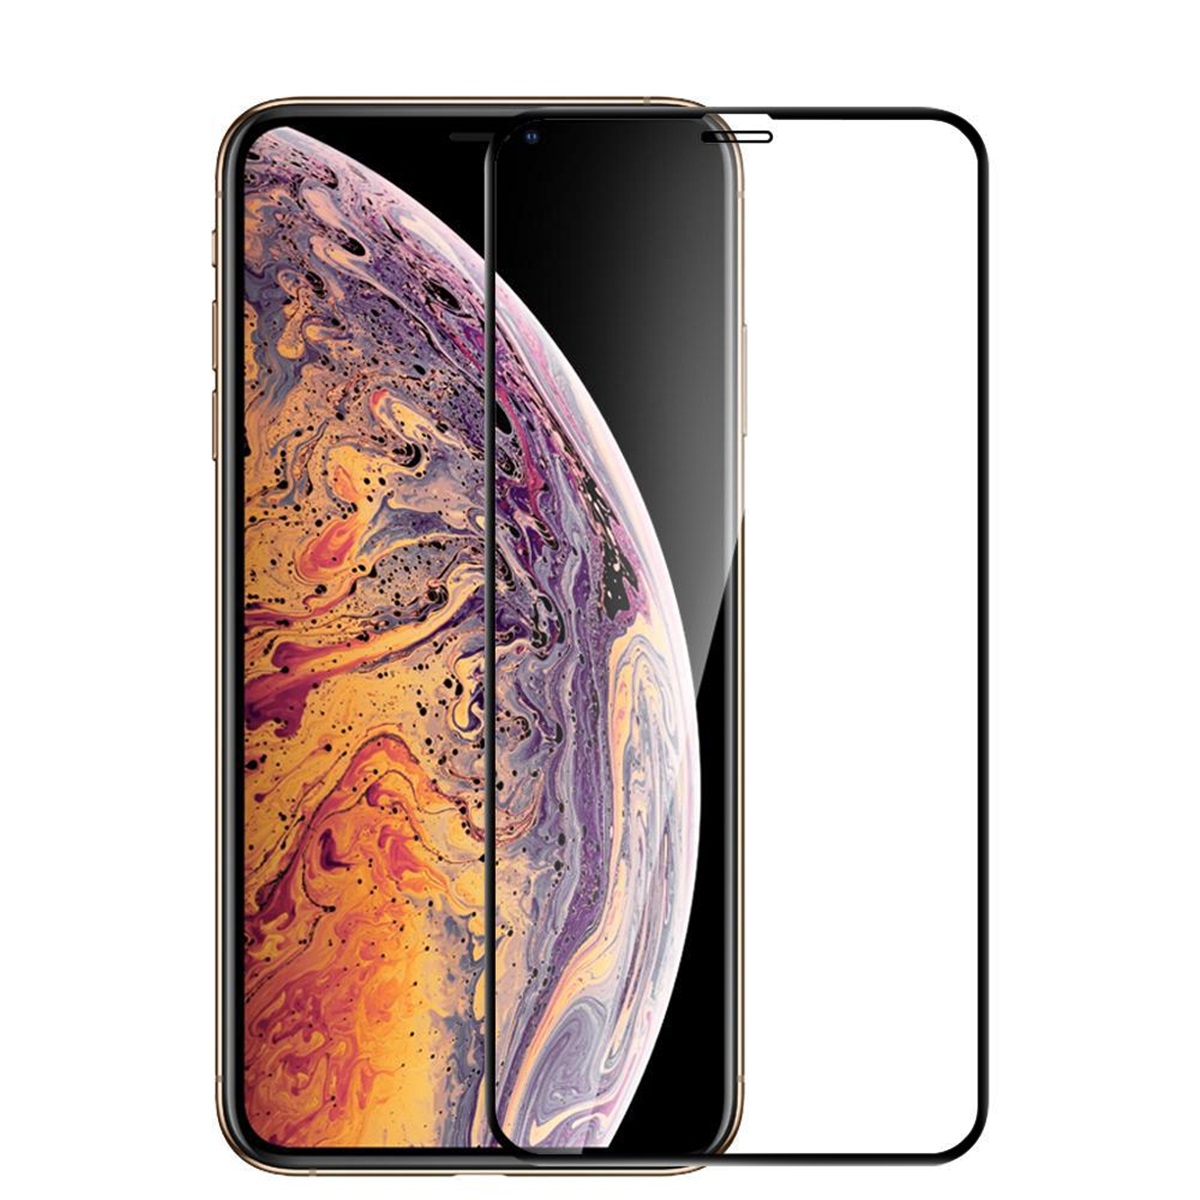 10-best-iphone-xs-max-screen-protectors-you-can-buy